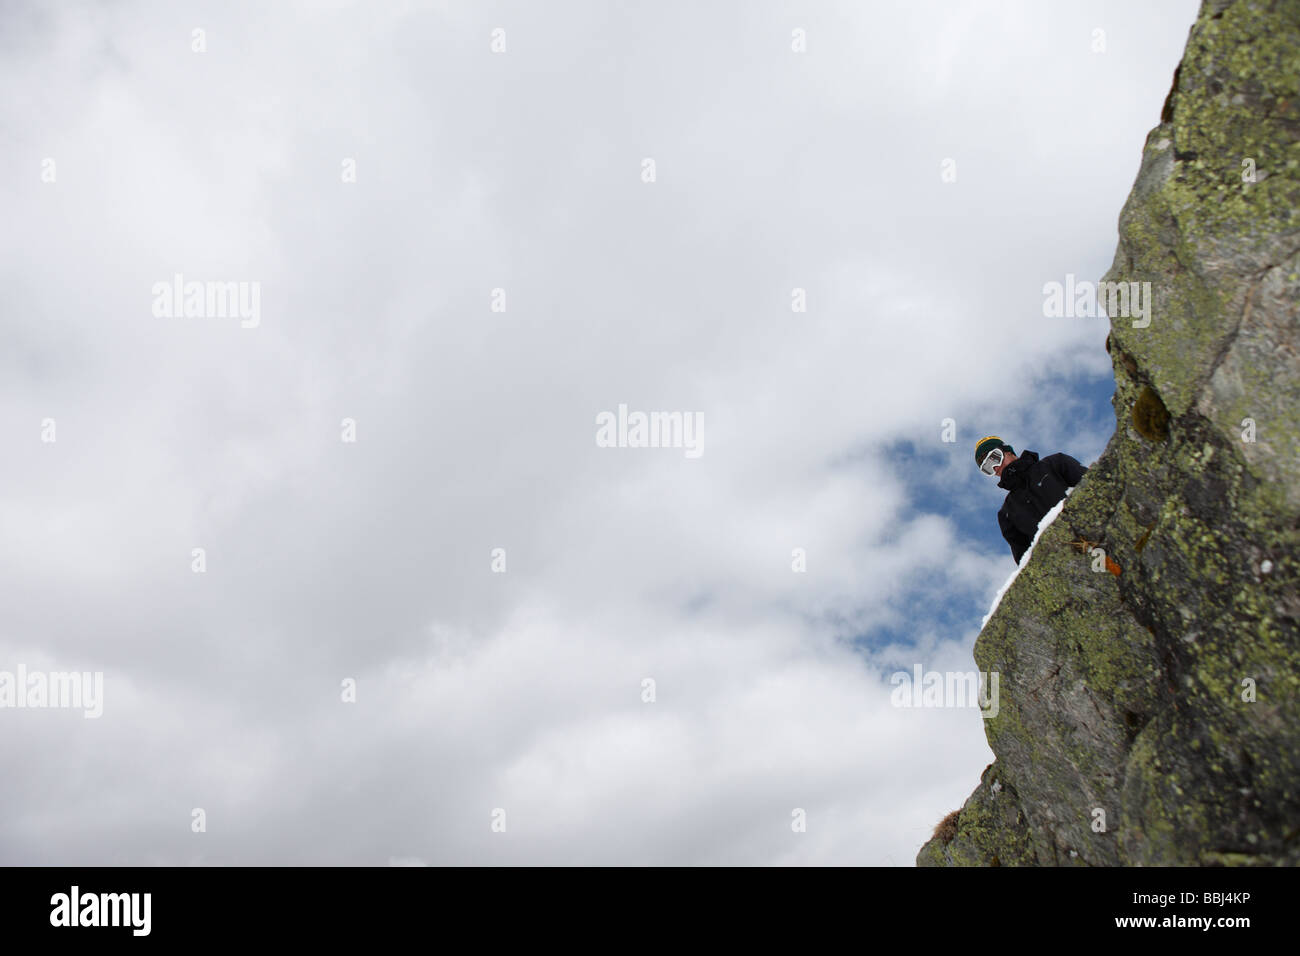 Snowboarder inspects the drop off a cliff which he will jump off, in the ski resort of Les Deux Alps, The Alps, France Stock Photo